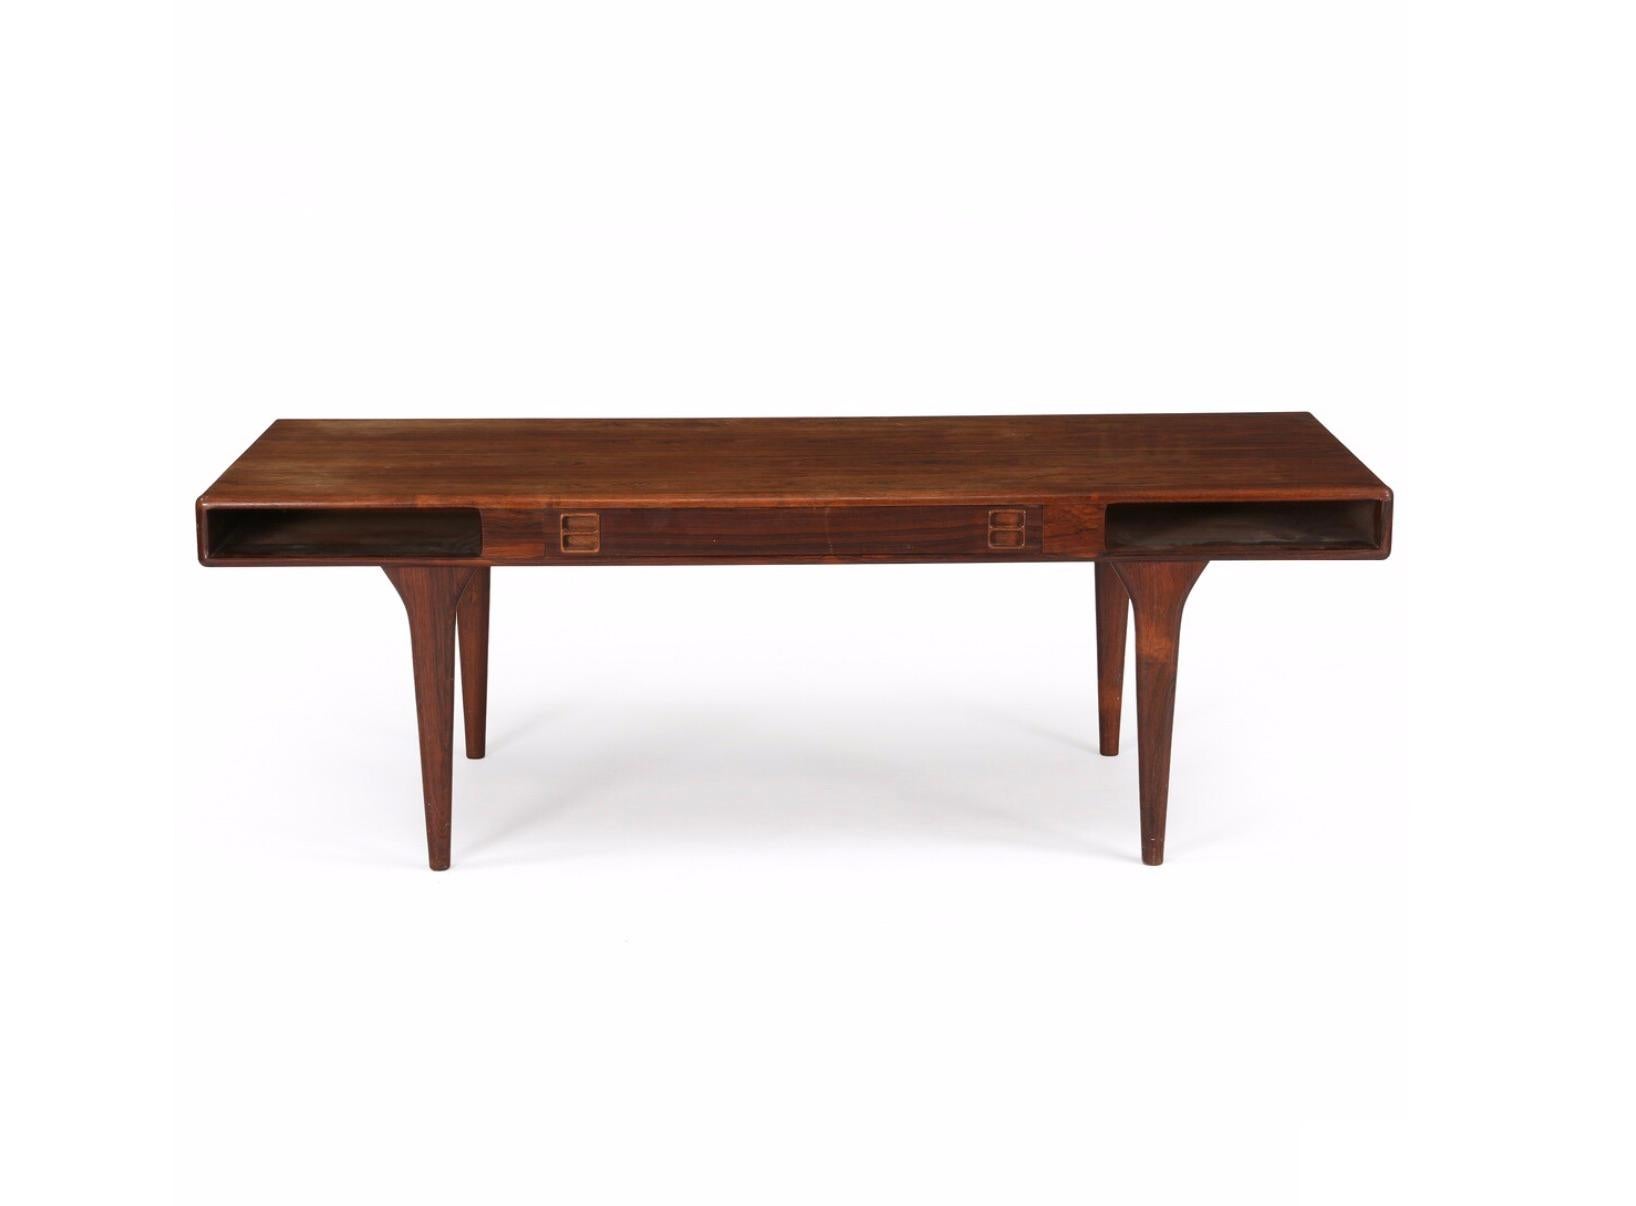 Rectangular Brazilian rosewood coffee table. Rail with drawers and shelves. Manufactured by CFC Silkeborg, with maker's metal tag. CFC Silkeborg, Denmark/ Presumably Jørgen and Nanna Ditzel.



